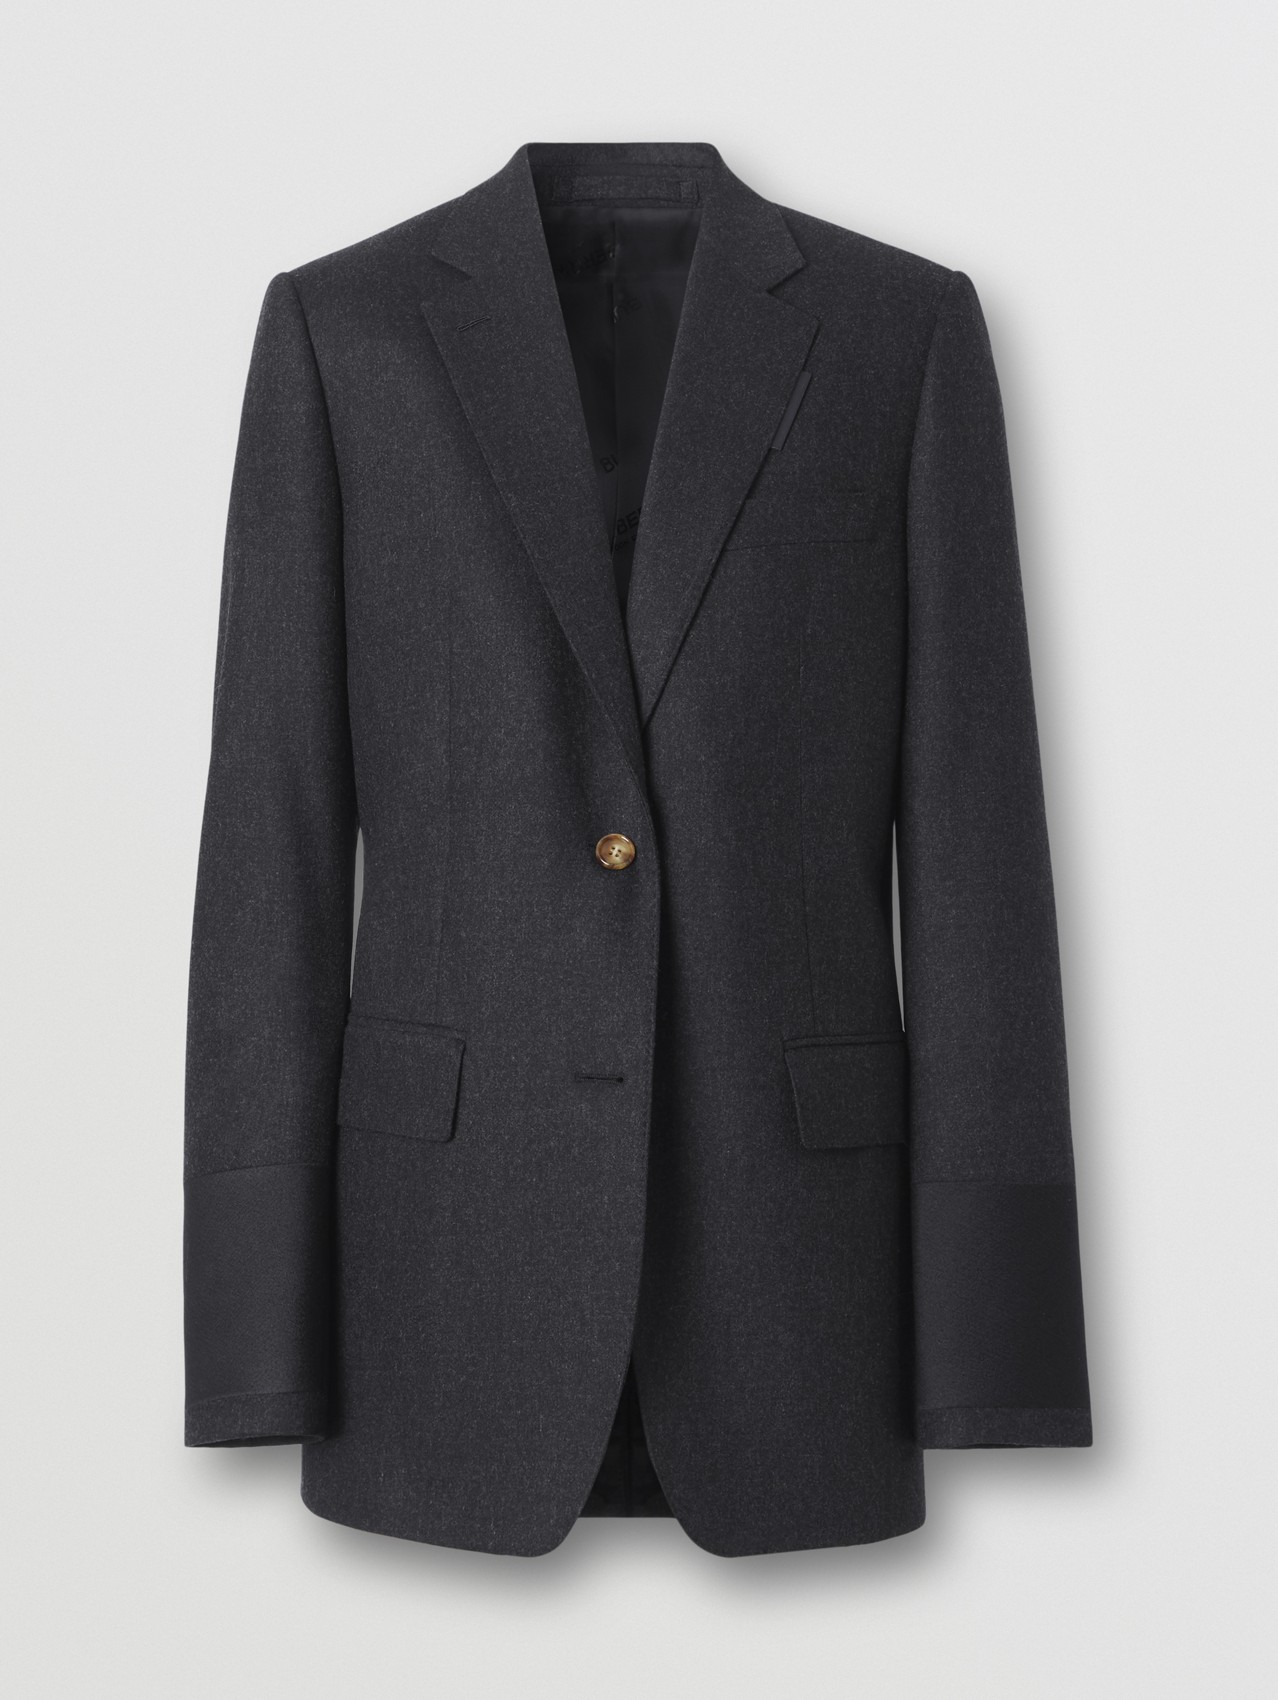 Cuff Detail Stretch Wool Tailored Jacket in Charcoal Melange